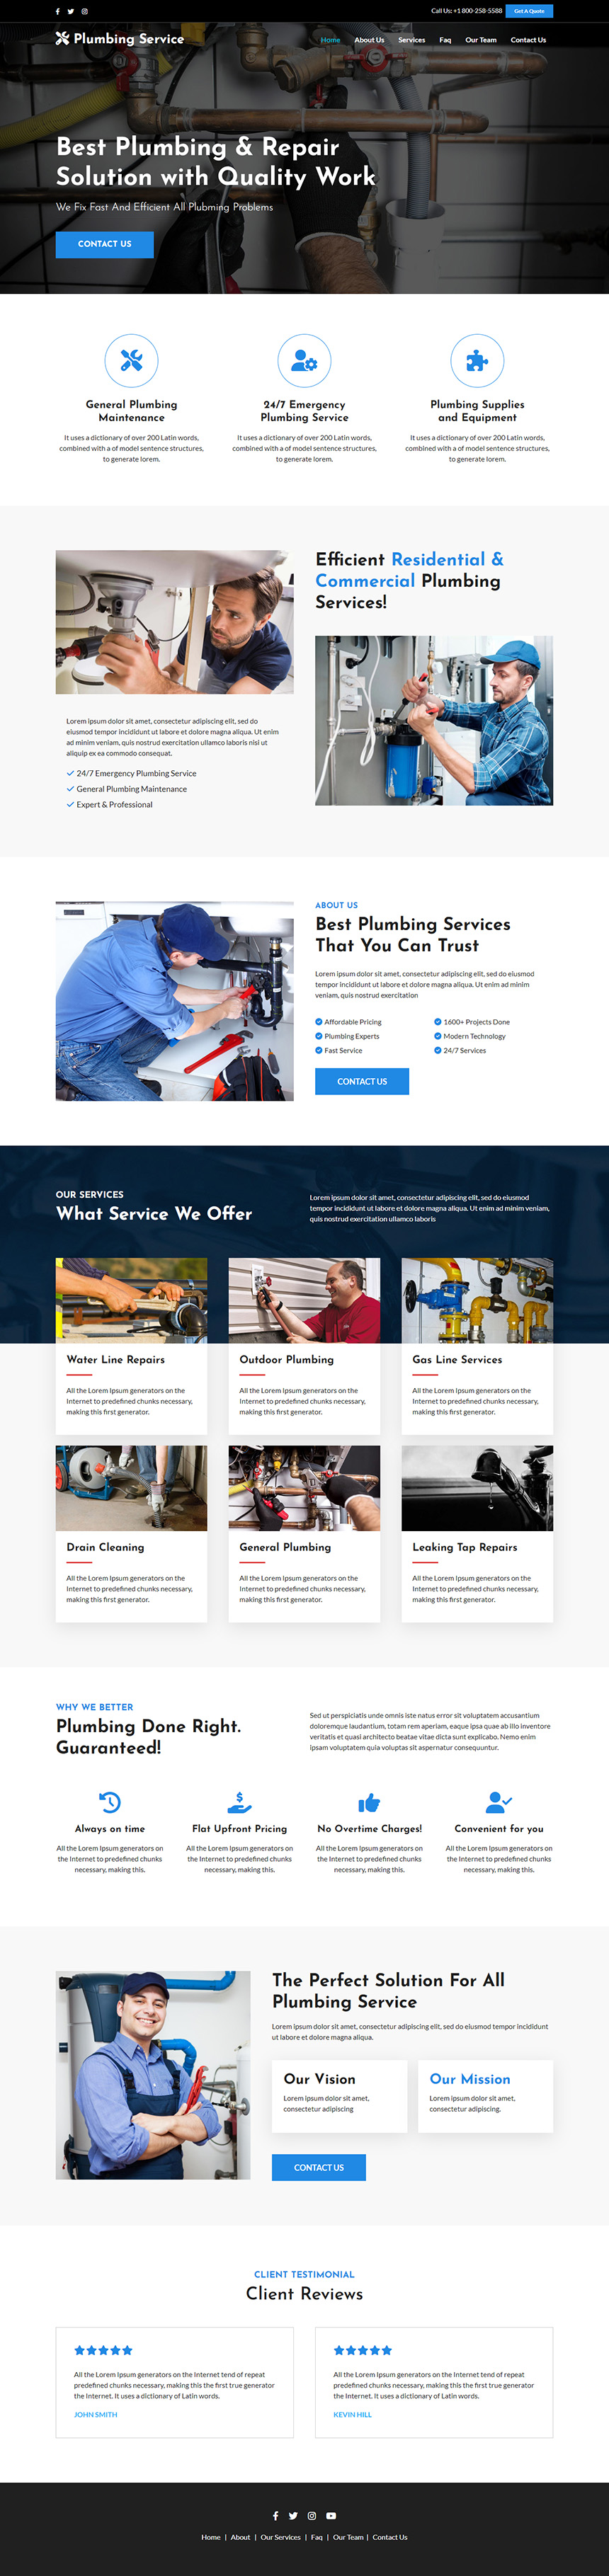 residential and commercial plumbing service responsive website design